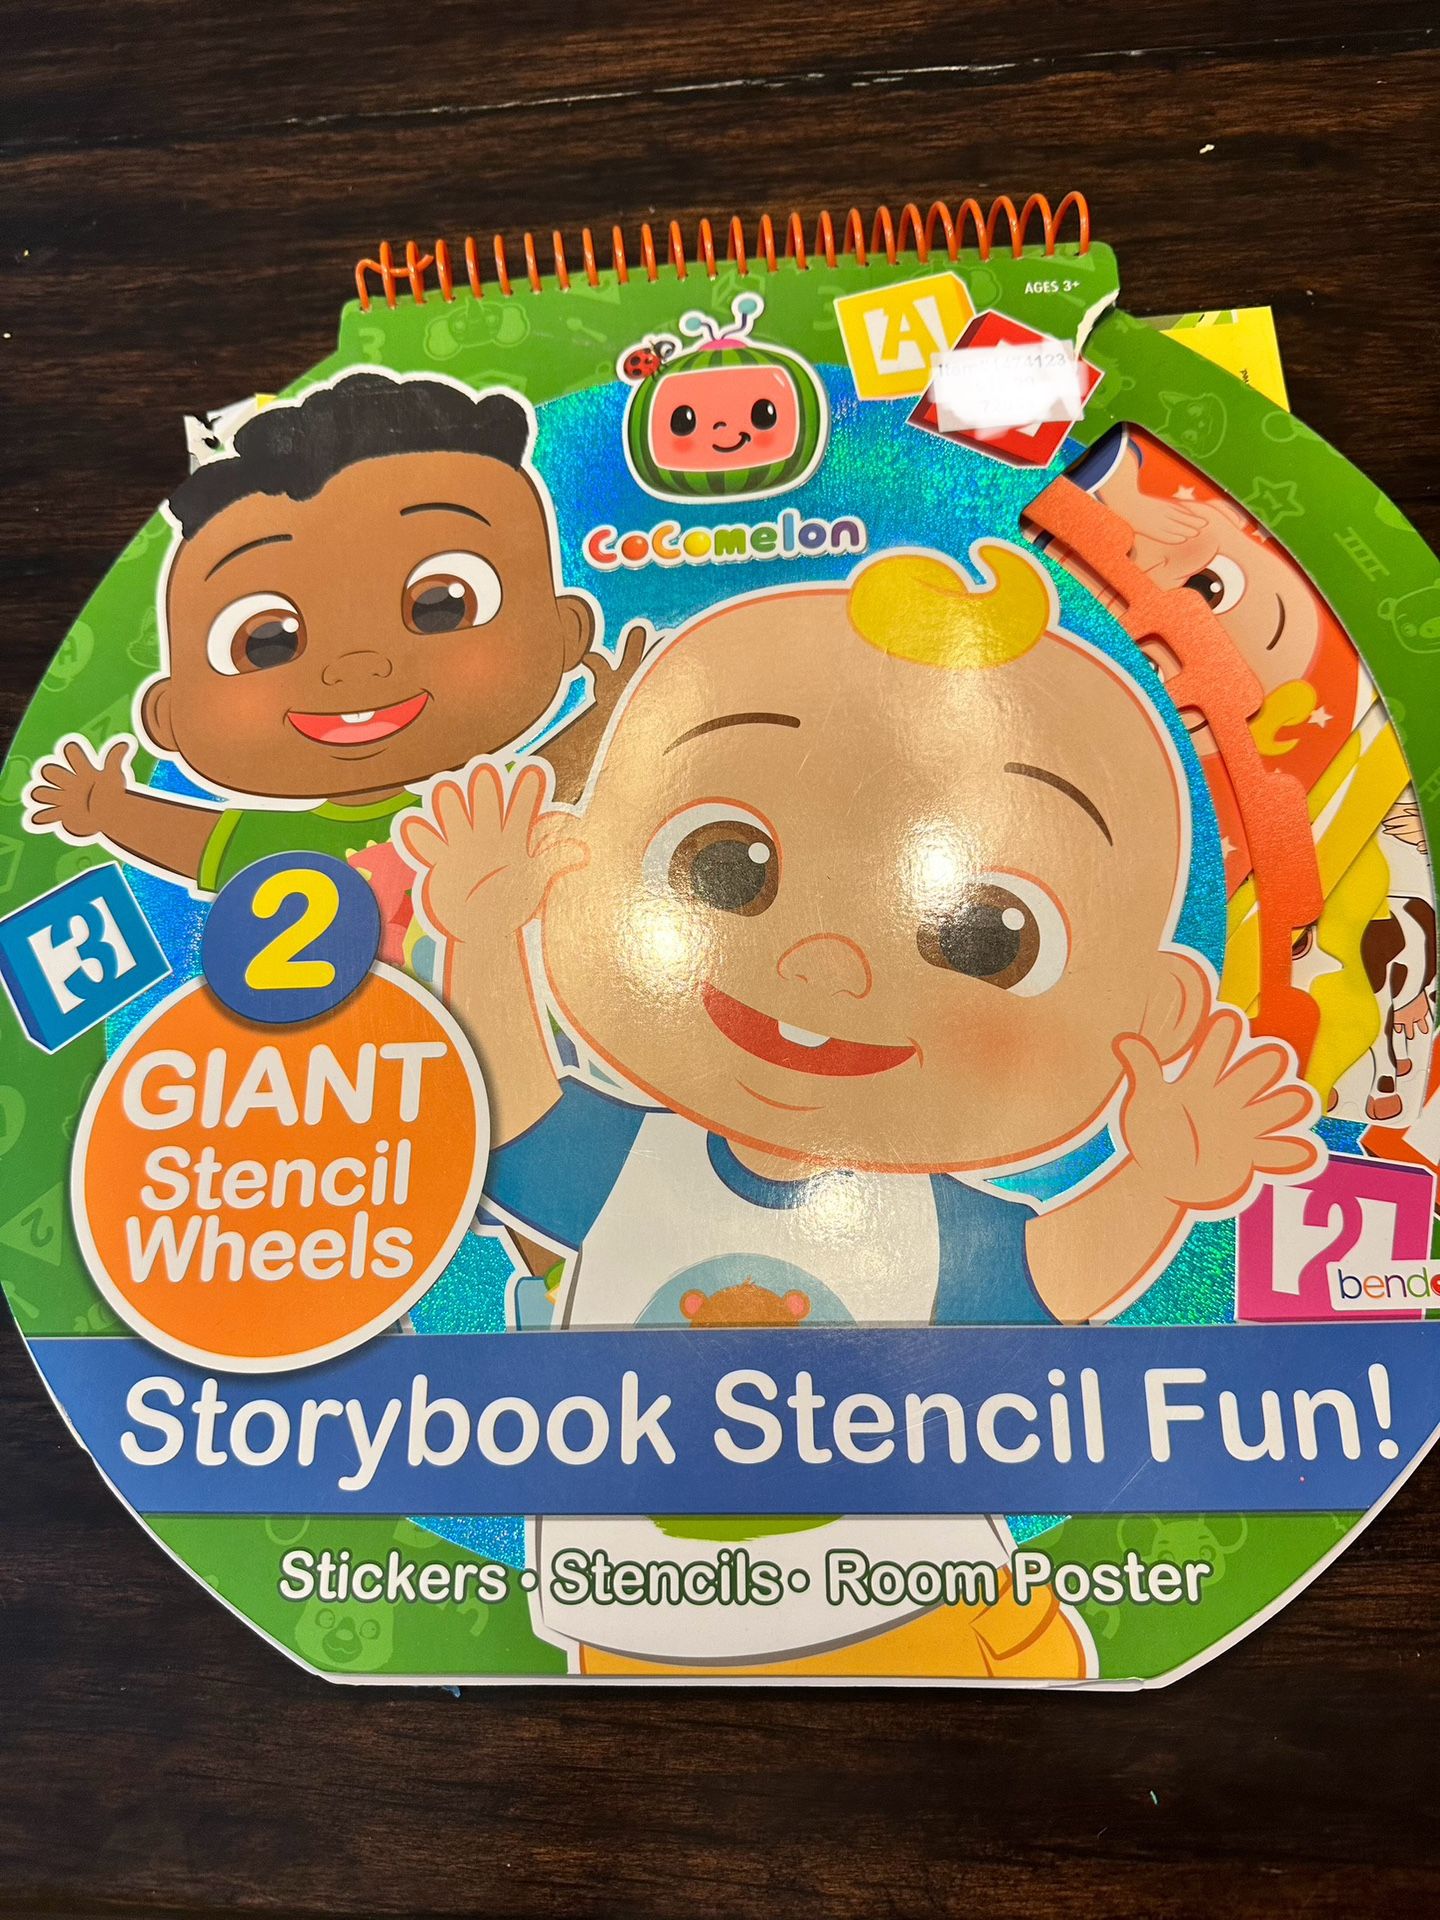 Cocomelon Themed Activity Book - $10